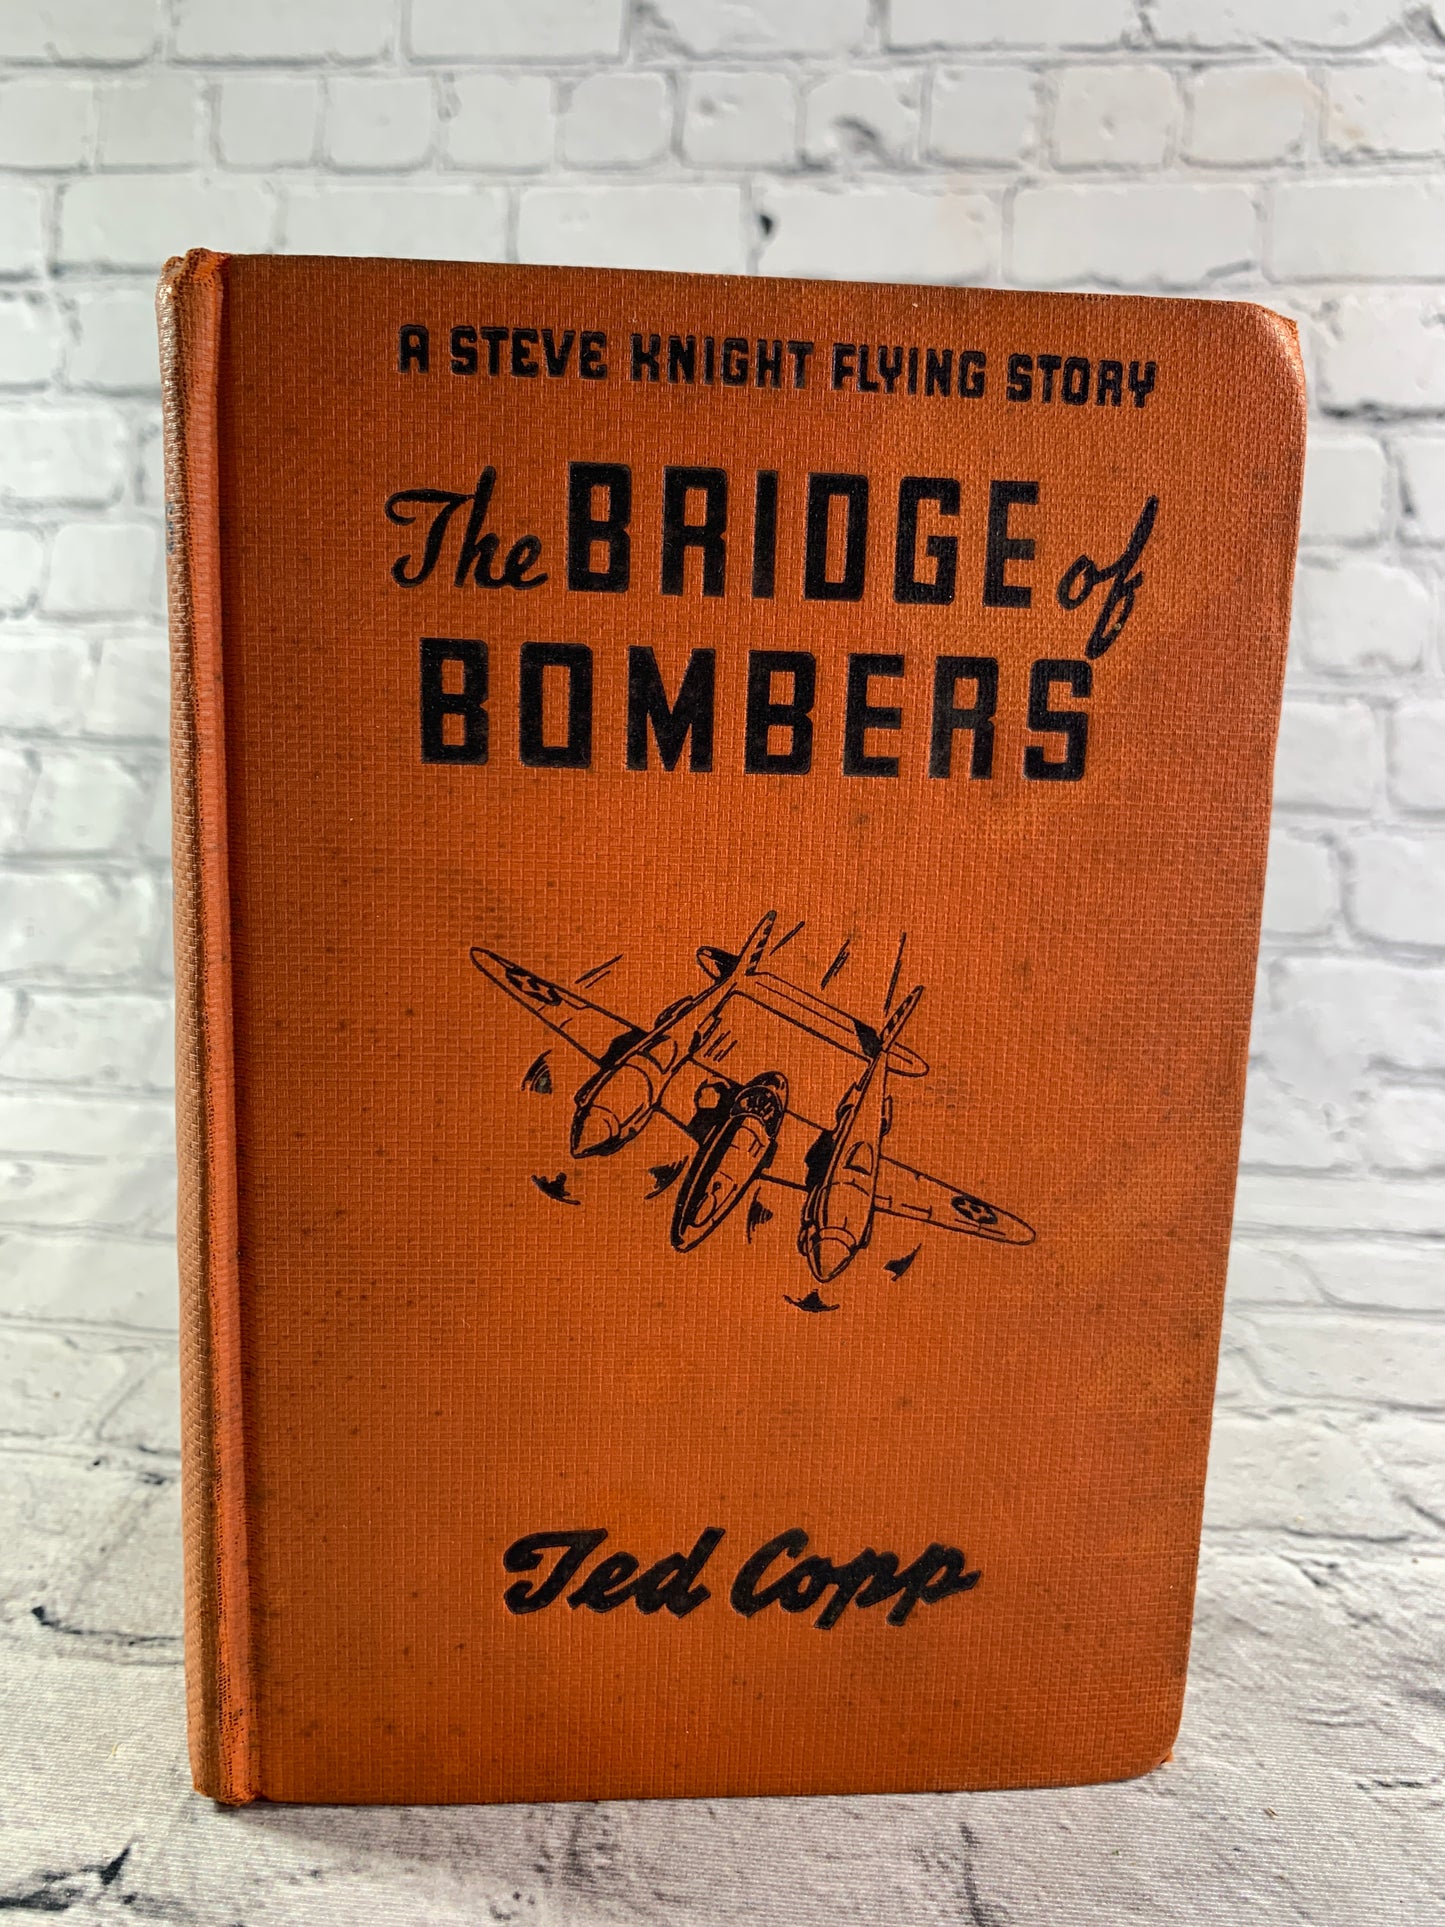 The Bridge of Bombers: A Steve Knight Flying Story by Ted Copp [1941]